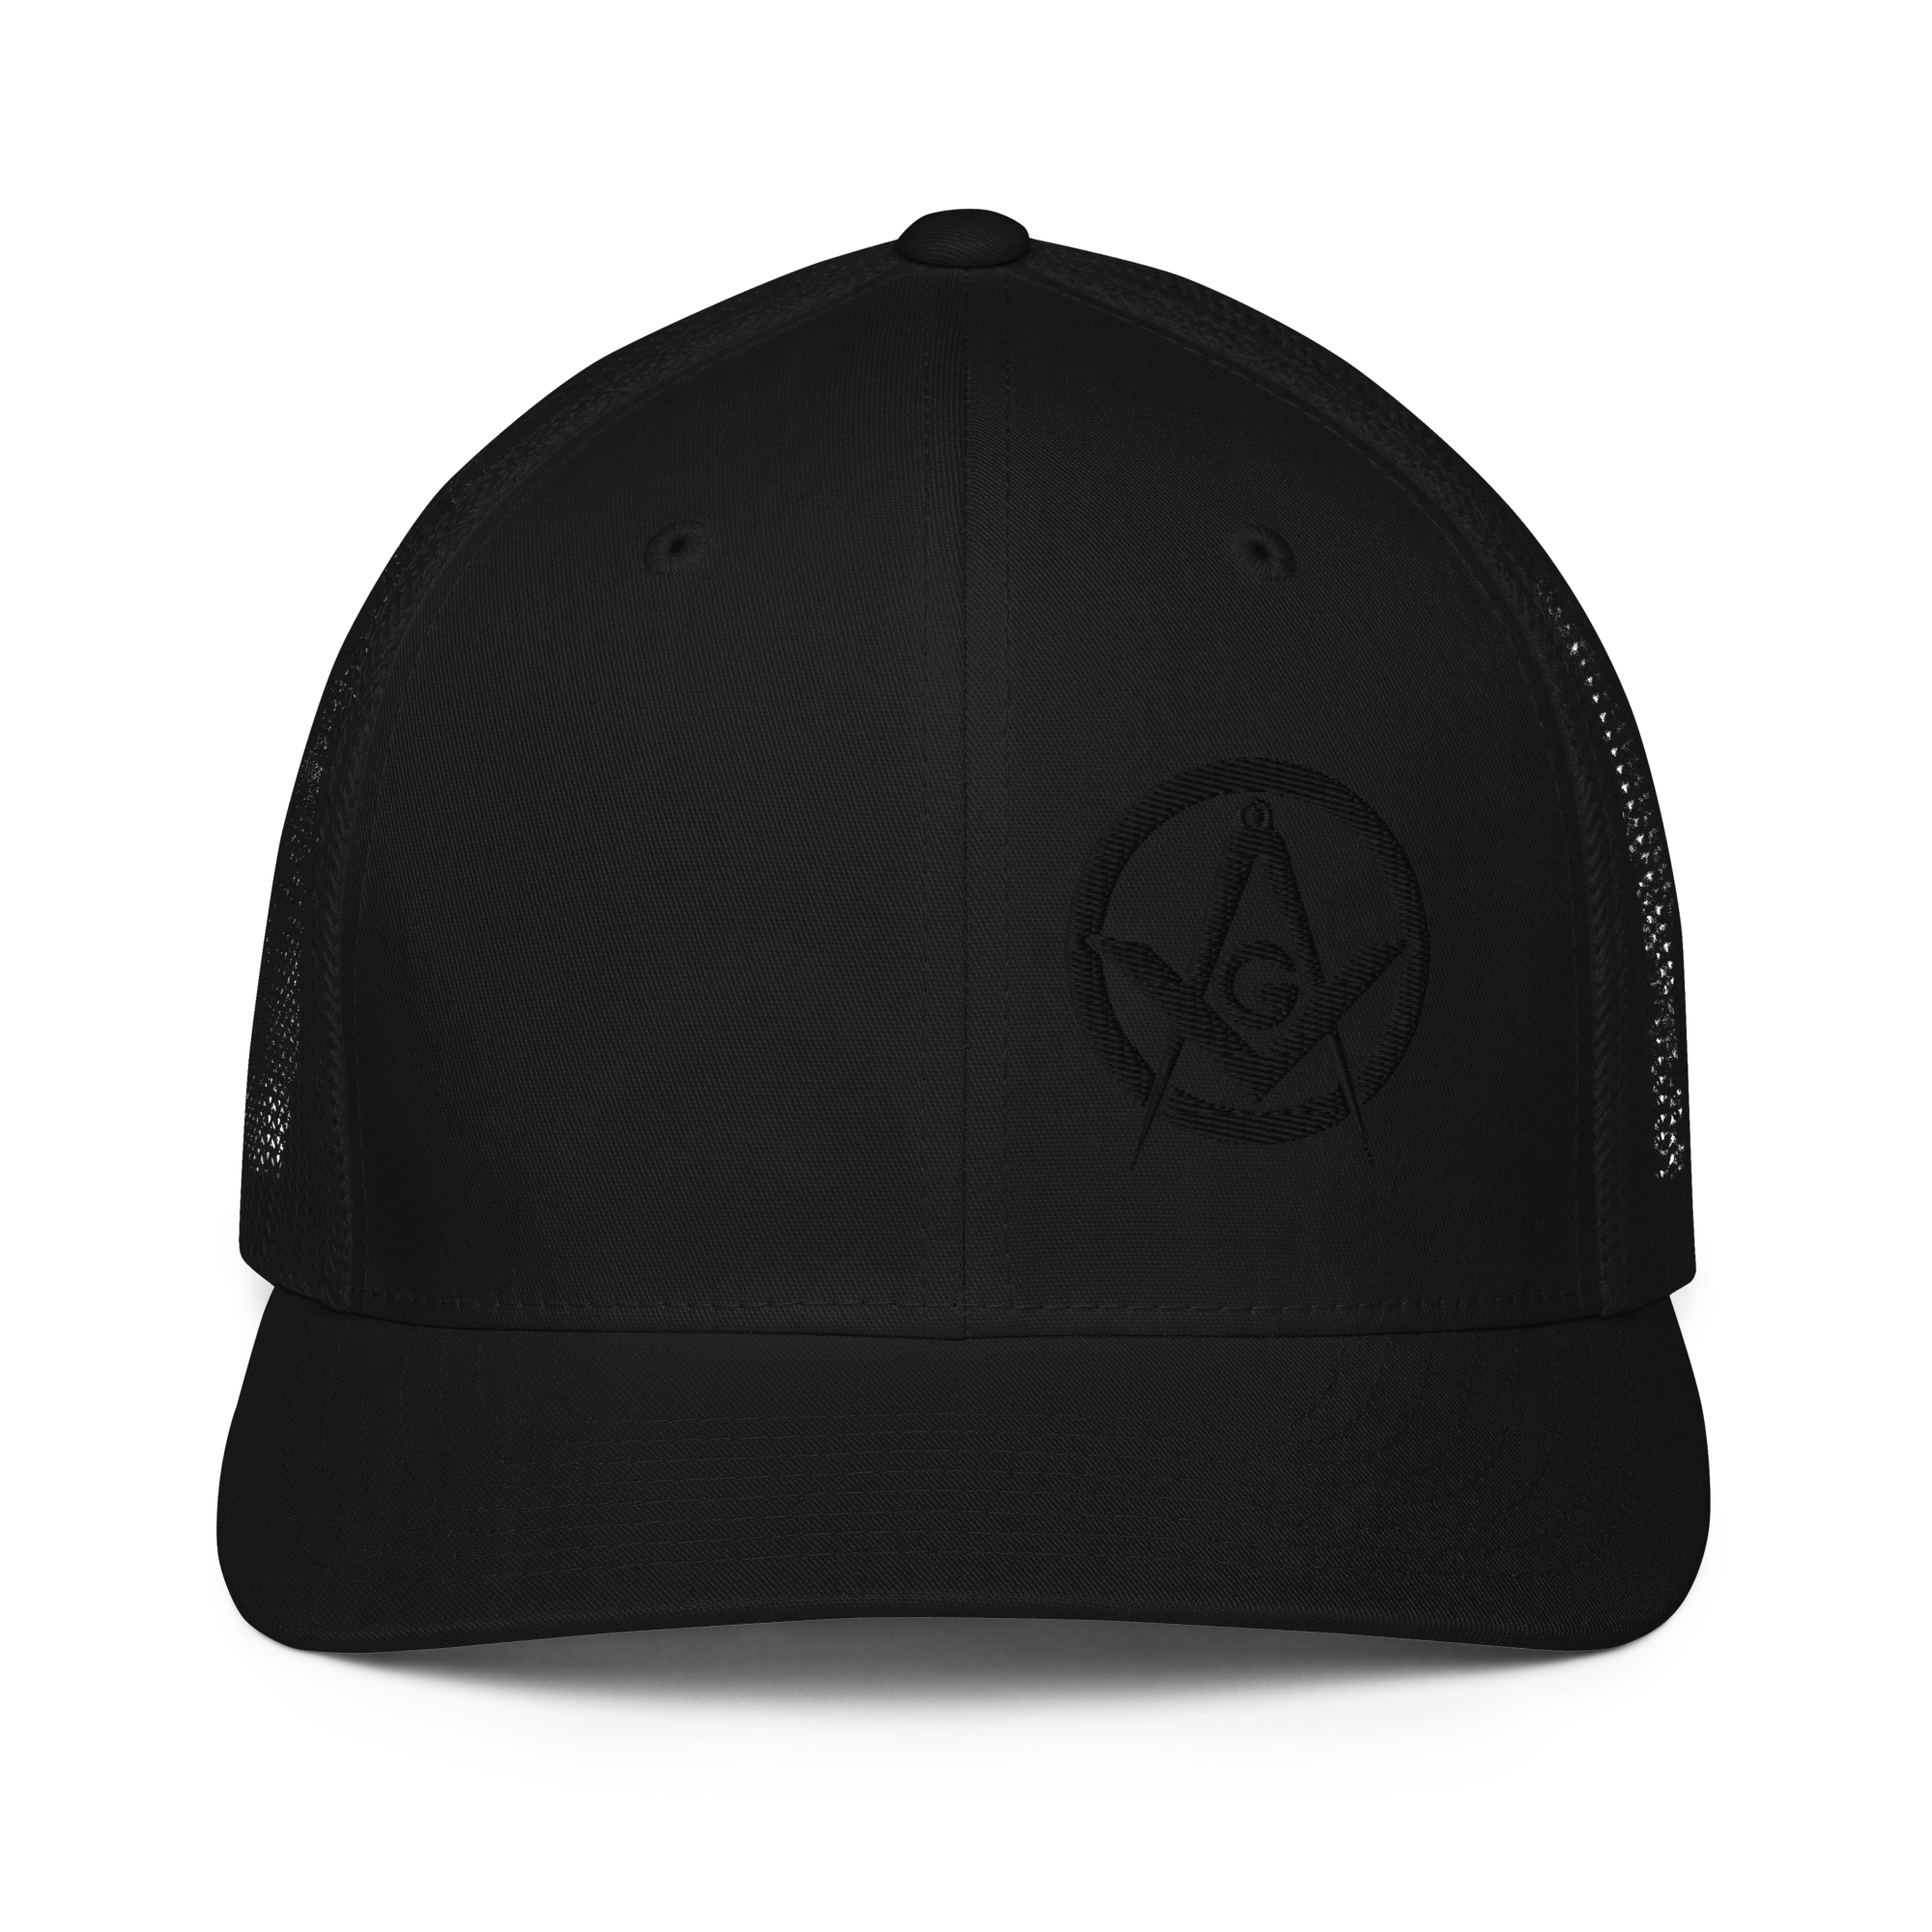 Square and Compass Mesh Back Trucker Hat